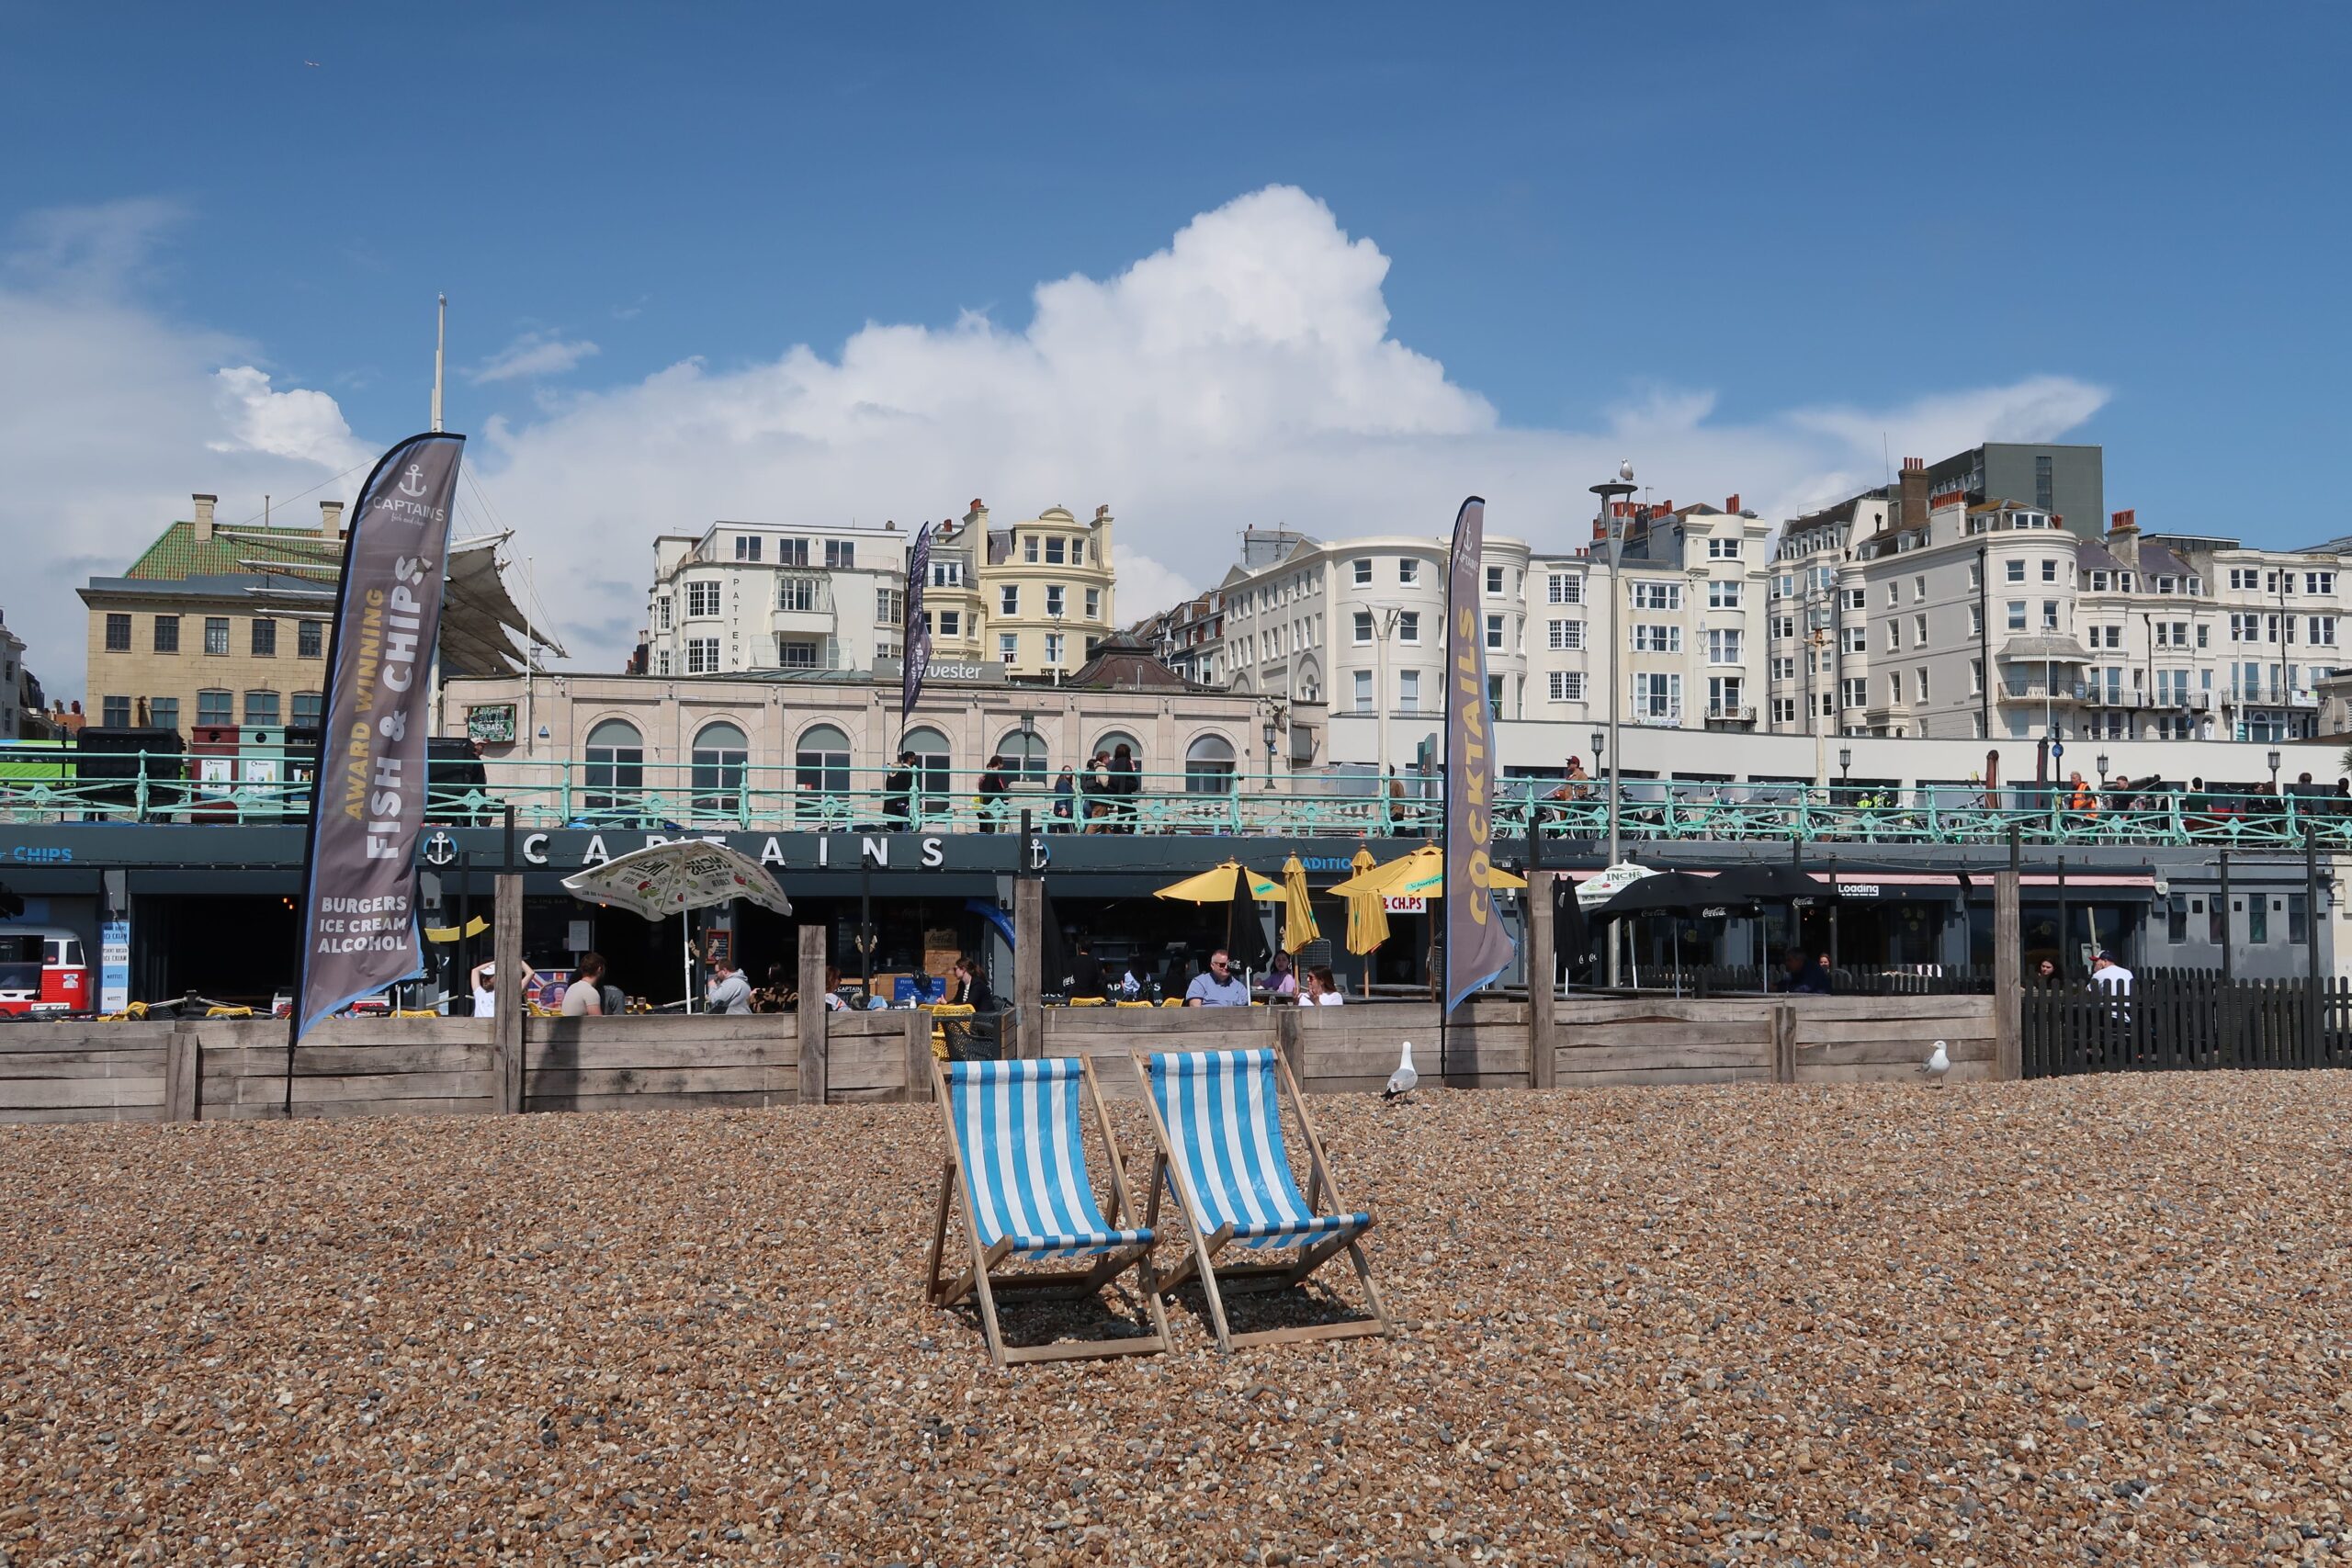 brighton day trip from london quick easy within 1 hour train things to see and do photo spots attractions